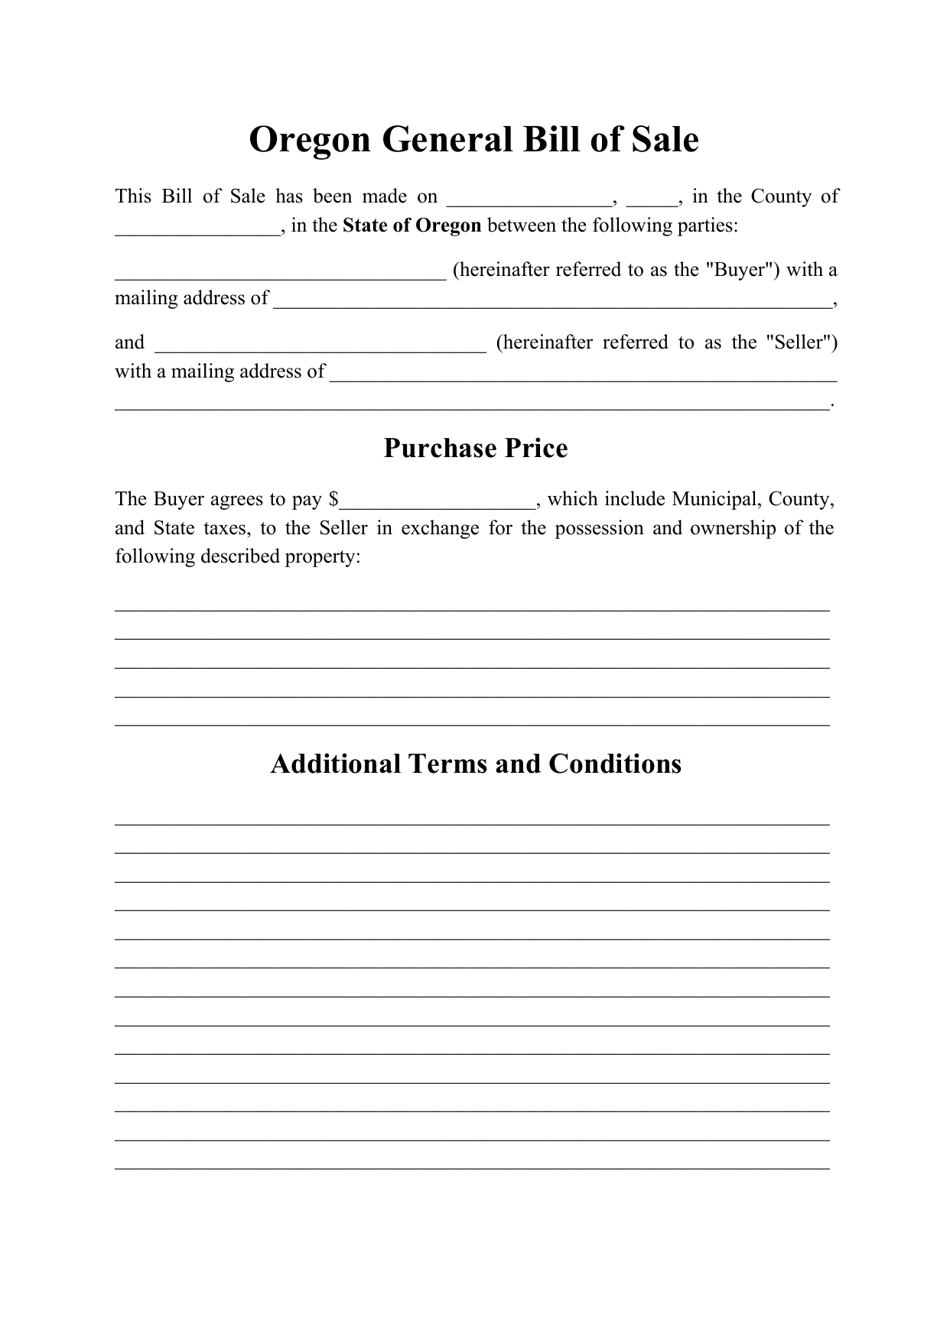 Generic Bill of Sale Form - Oregon, Page 1